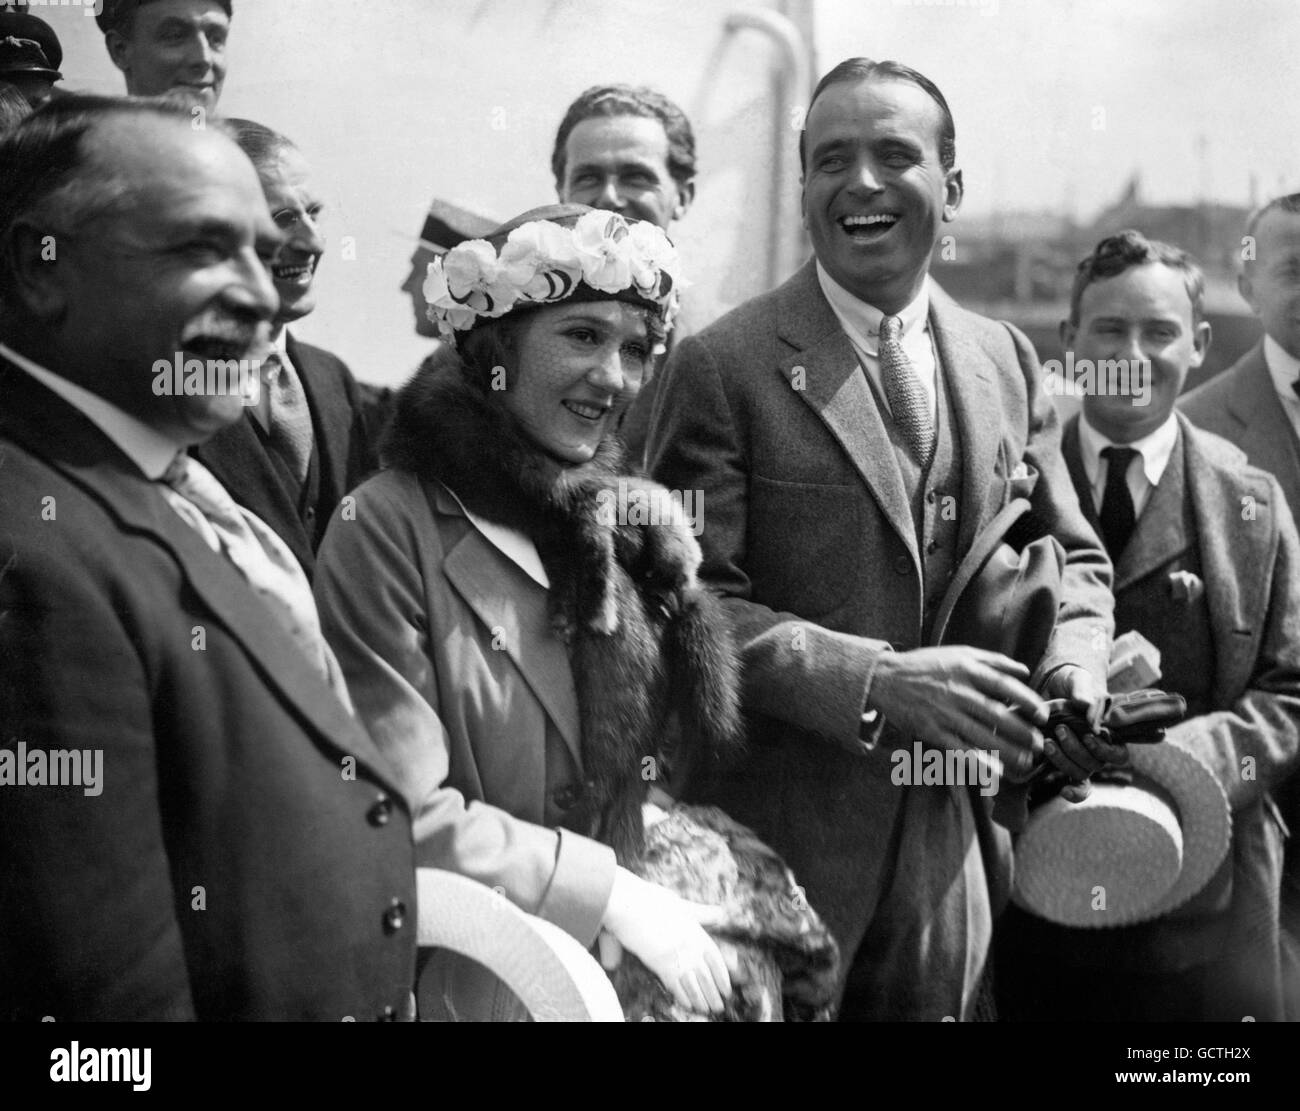 Celebrity Appearance - Film - Douglas Fairbanks and Mary Pickford - Southampton. Famous American actors Douglas Fairbanks and Mary Pickford on their arrival in Southampton. Stock Photo